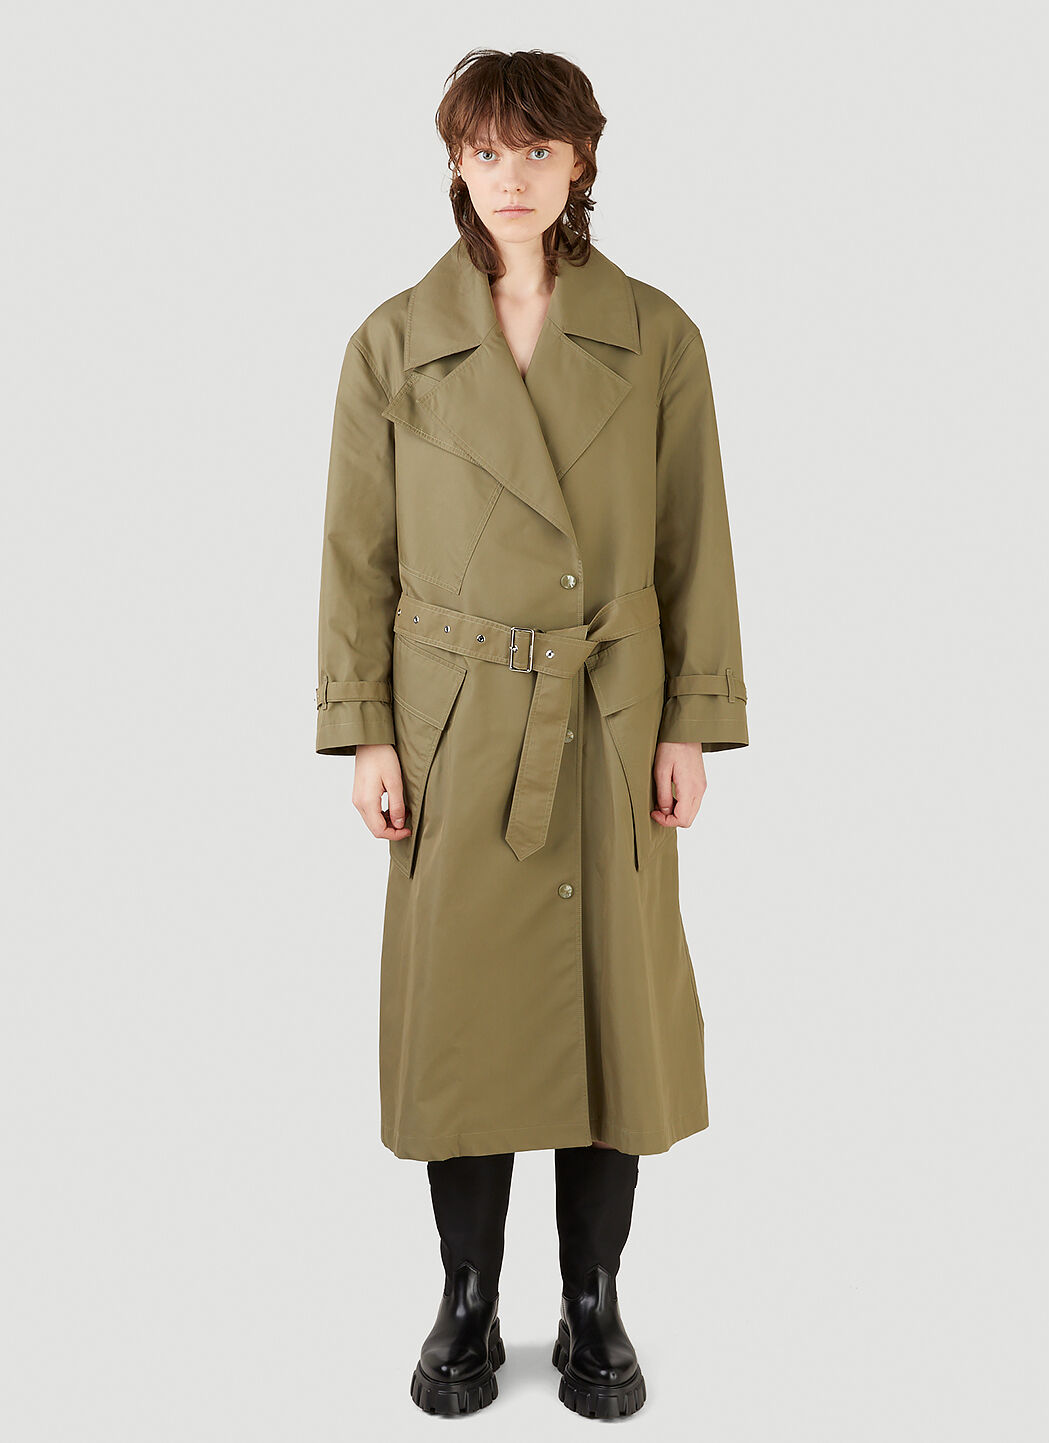 A.P.C. Oversized Trench Coat Brown apc0248026